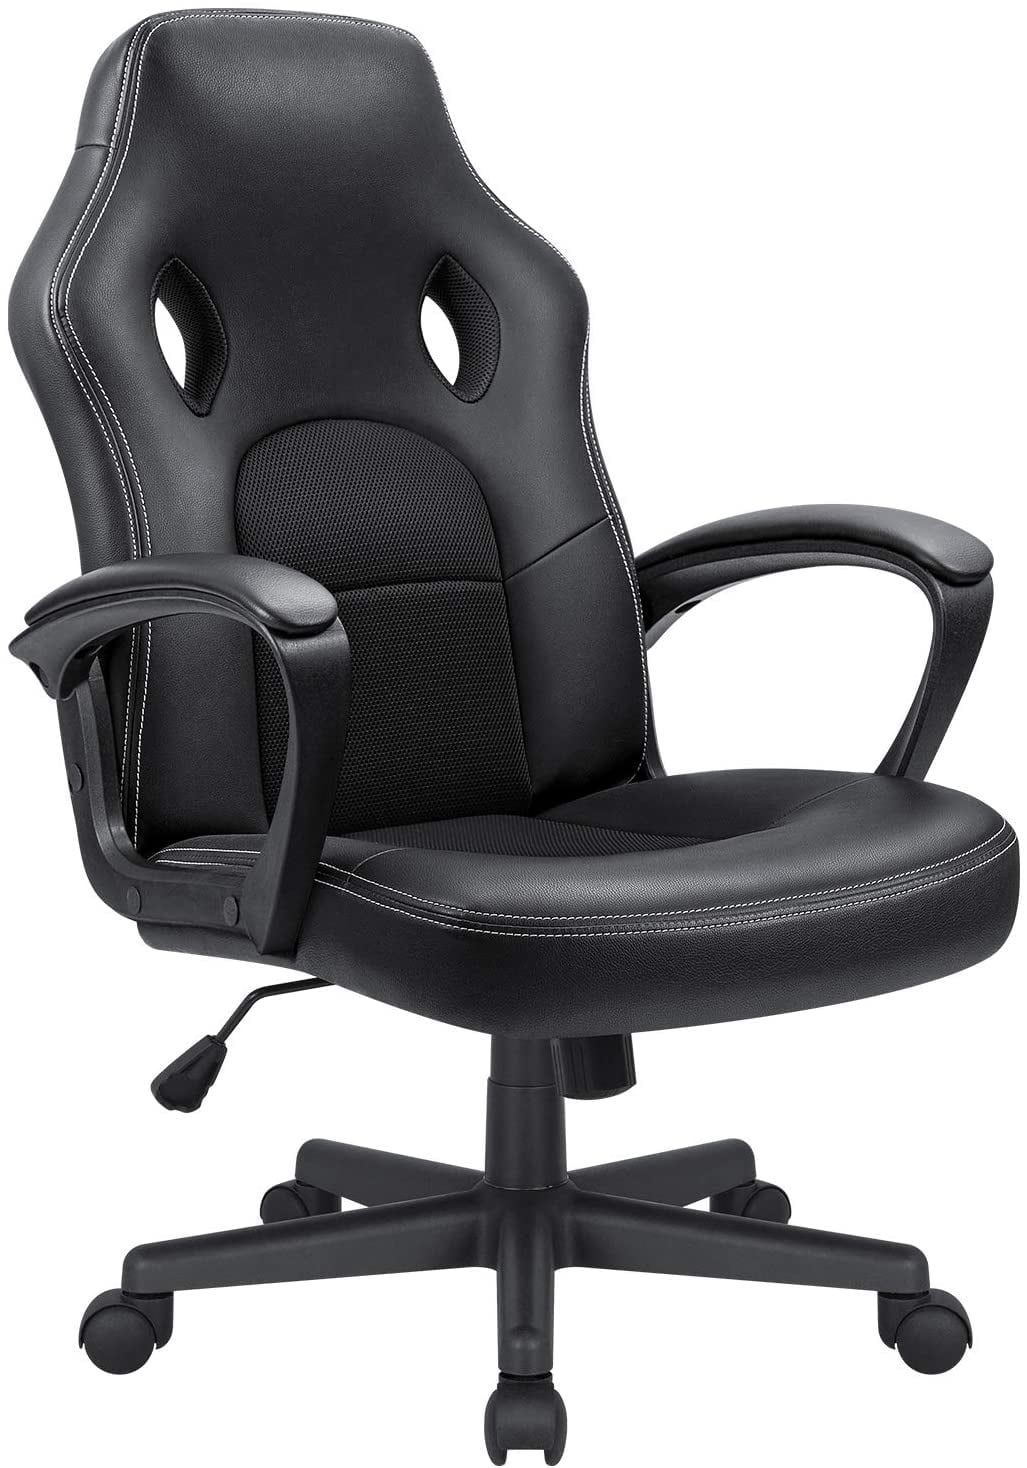 Lacoo Faux Leather Computer Gaming Chair Office Desk Chair with Lumbar ...